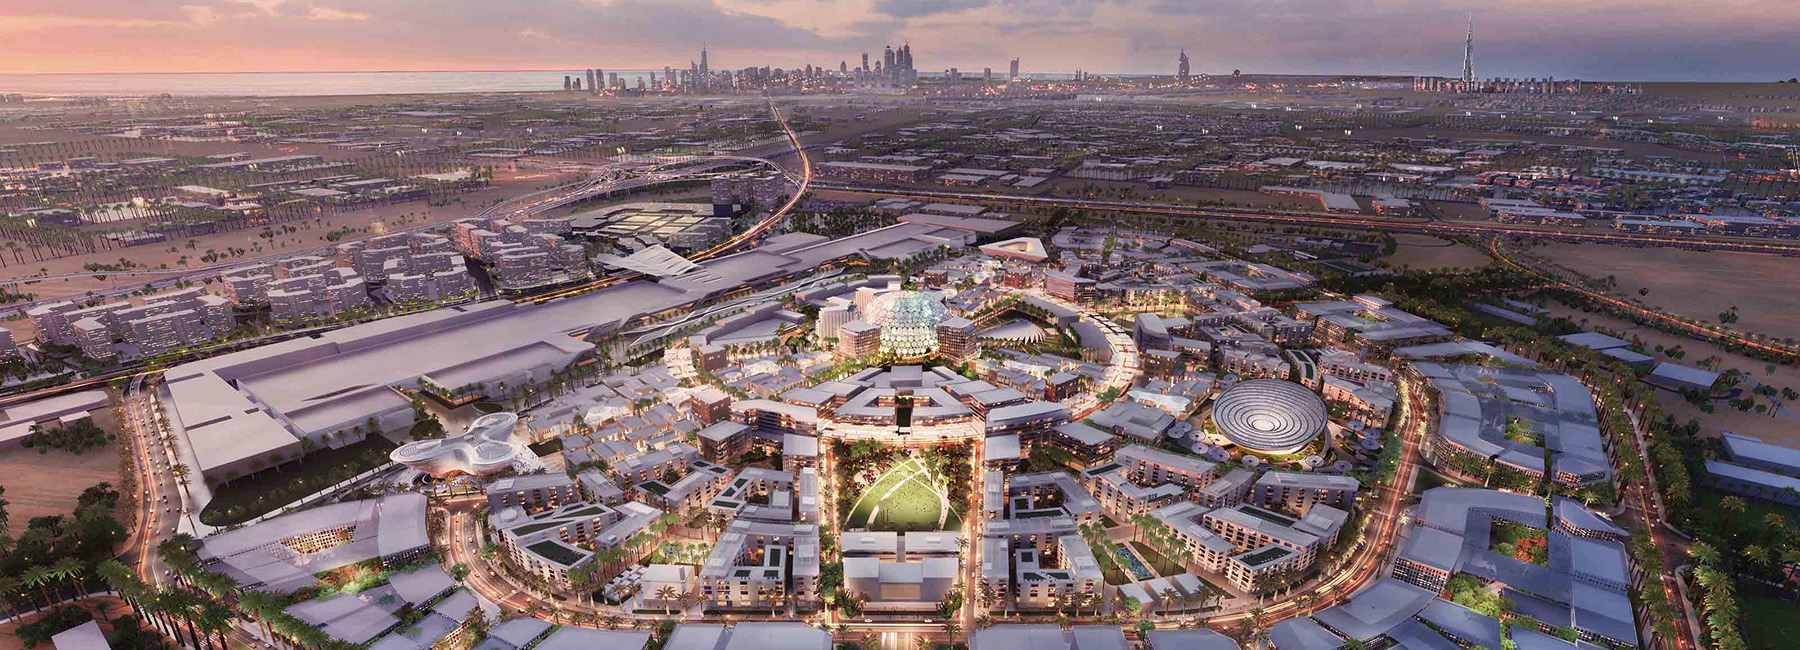 expo 2020 dubai architecture and pavilion design news and projects